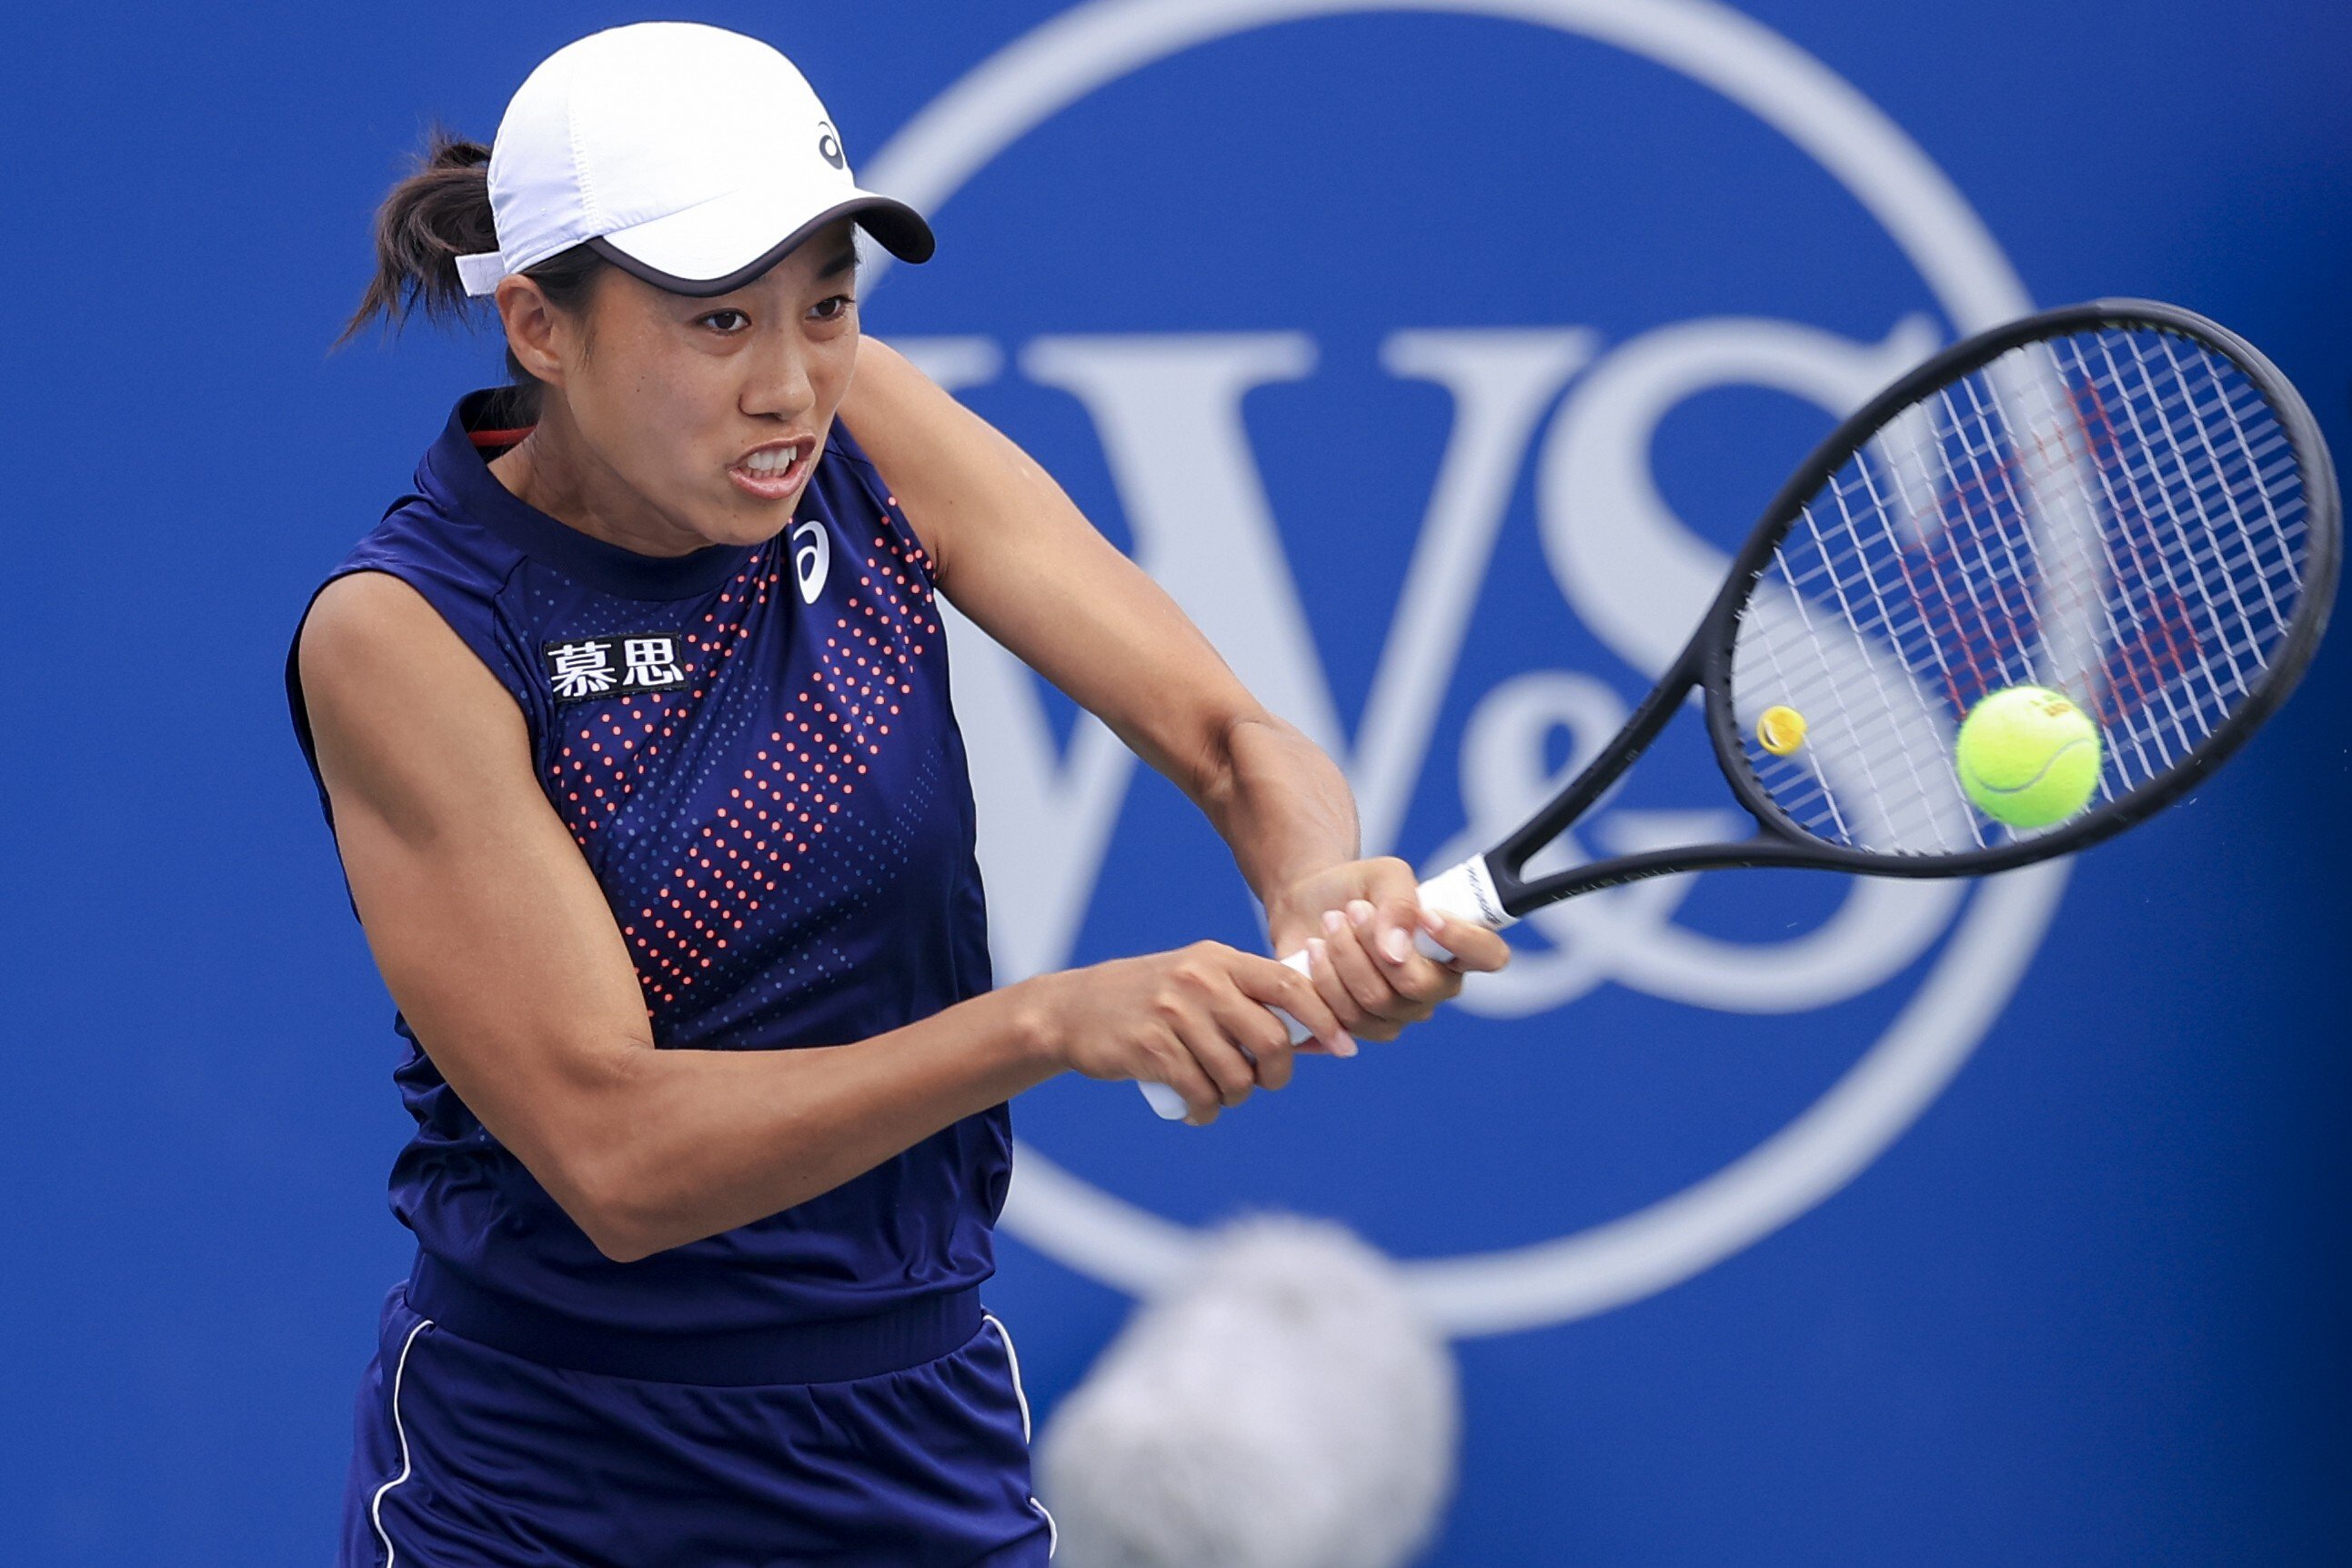 China’s Zhang Shuai plays a shot at the 2021 Western & Southern Open. Photo: Aaron Doster/USA Today Sports